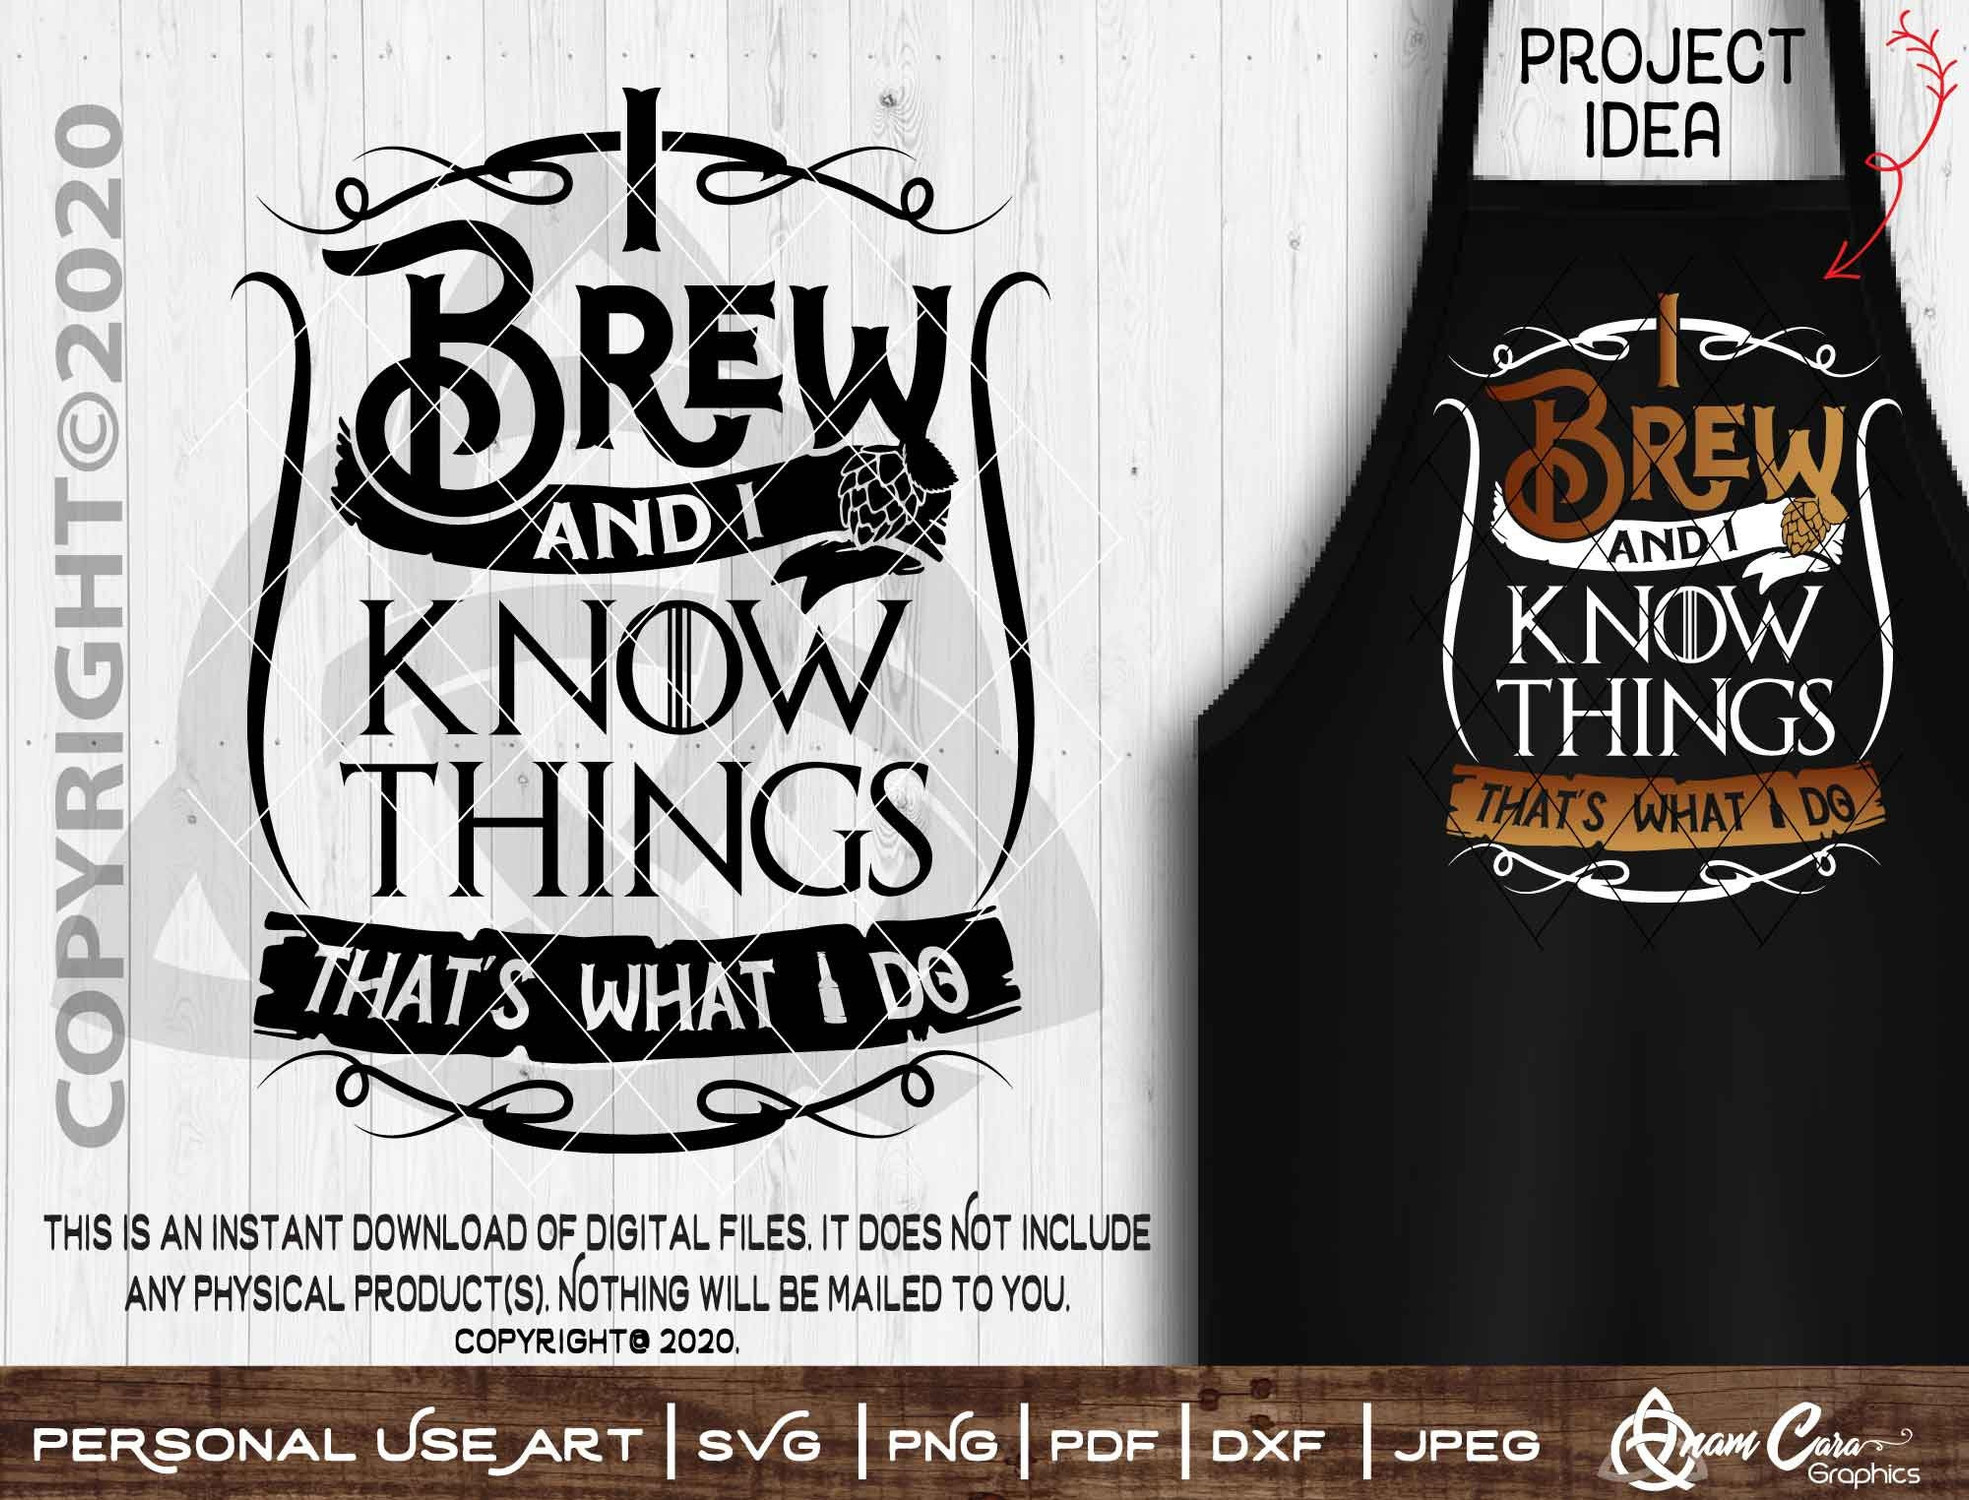 I Brew and I know Things, That's what I do